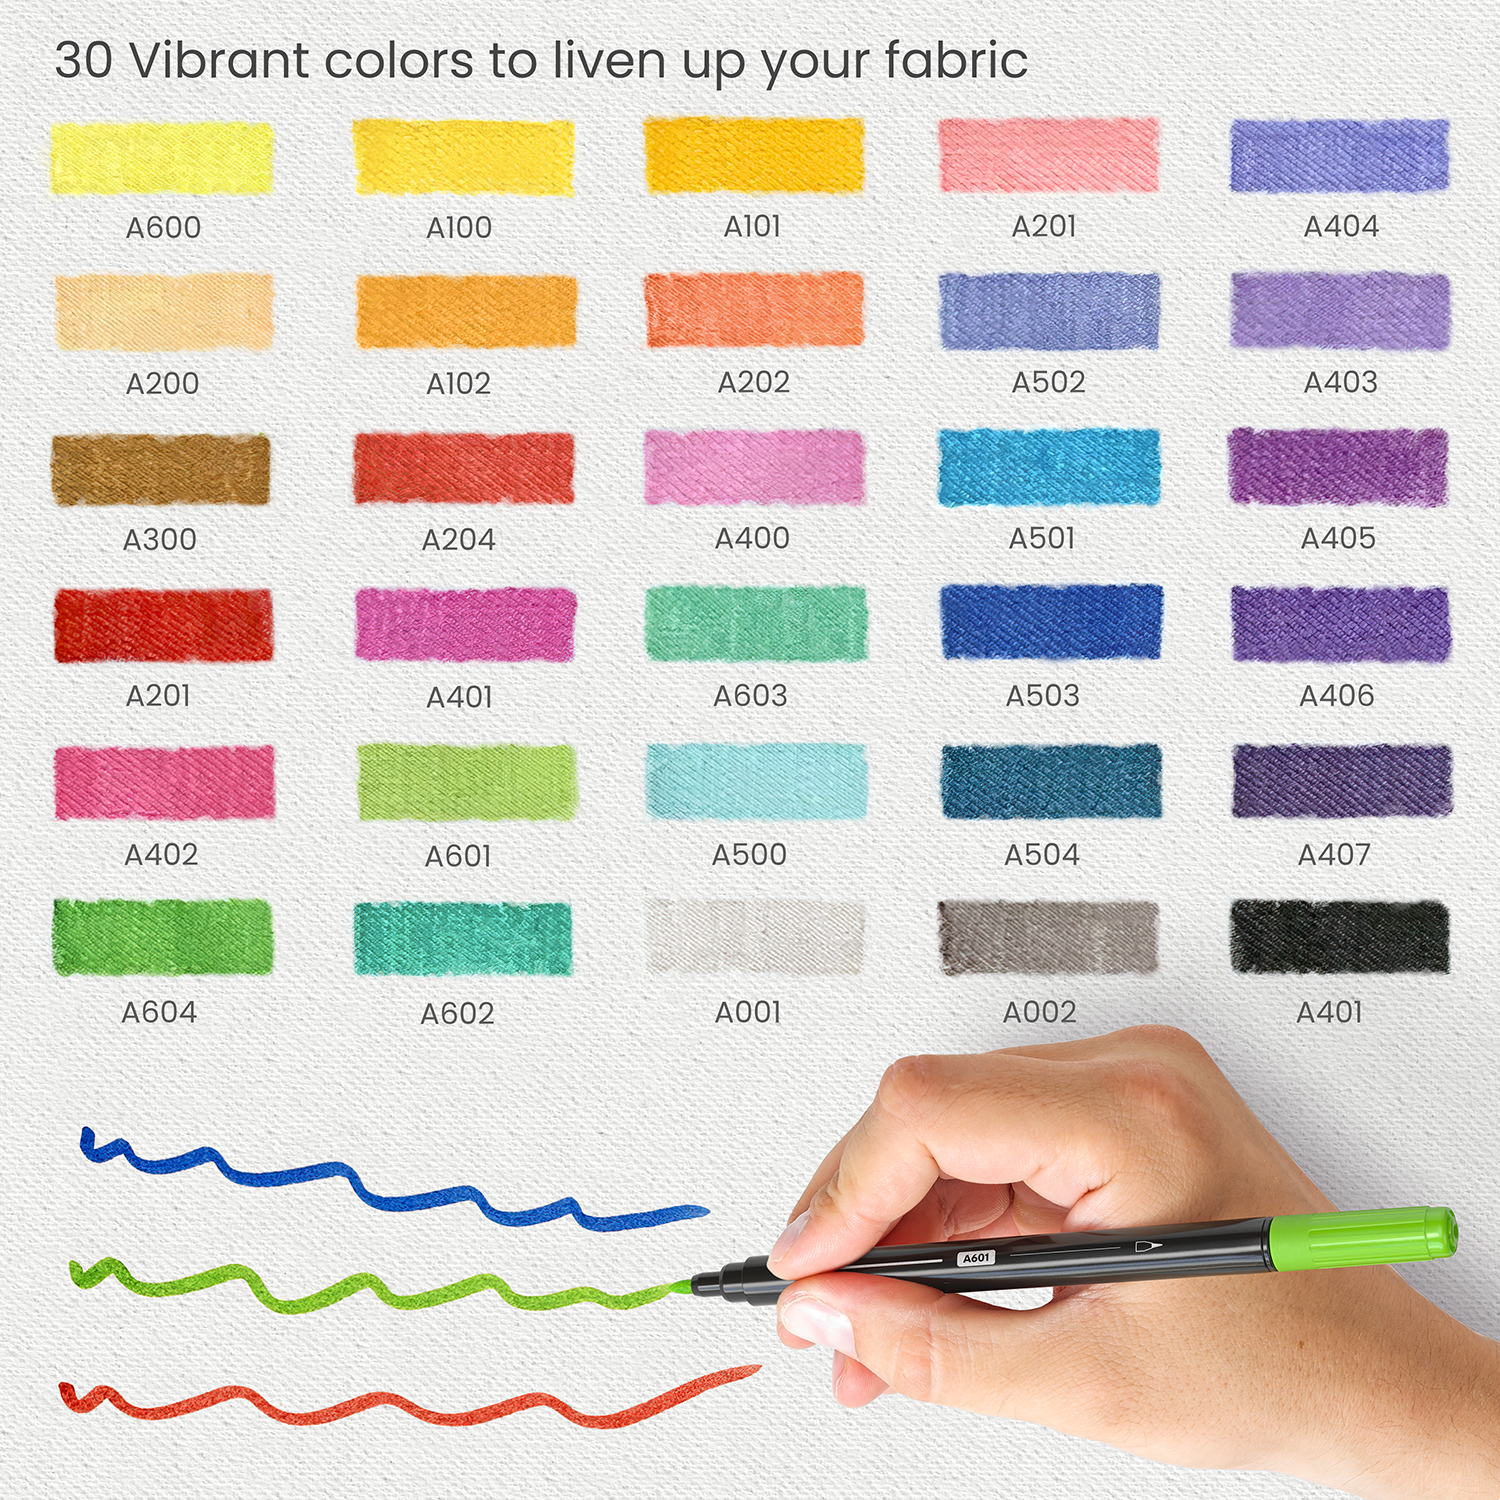 Fabric Markers Permanent for Clothes, 24 Colors Fabric Pens No